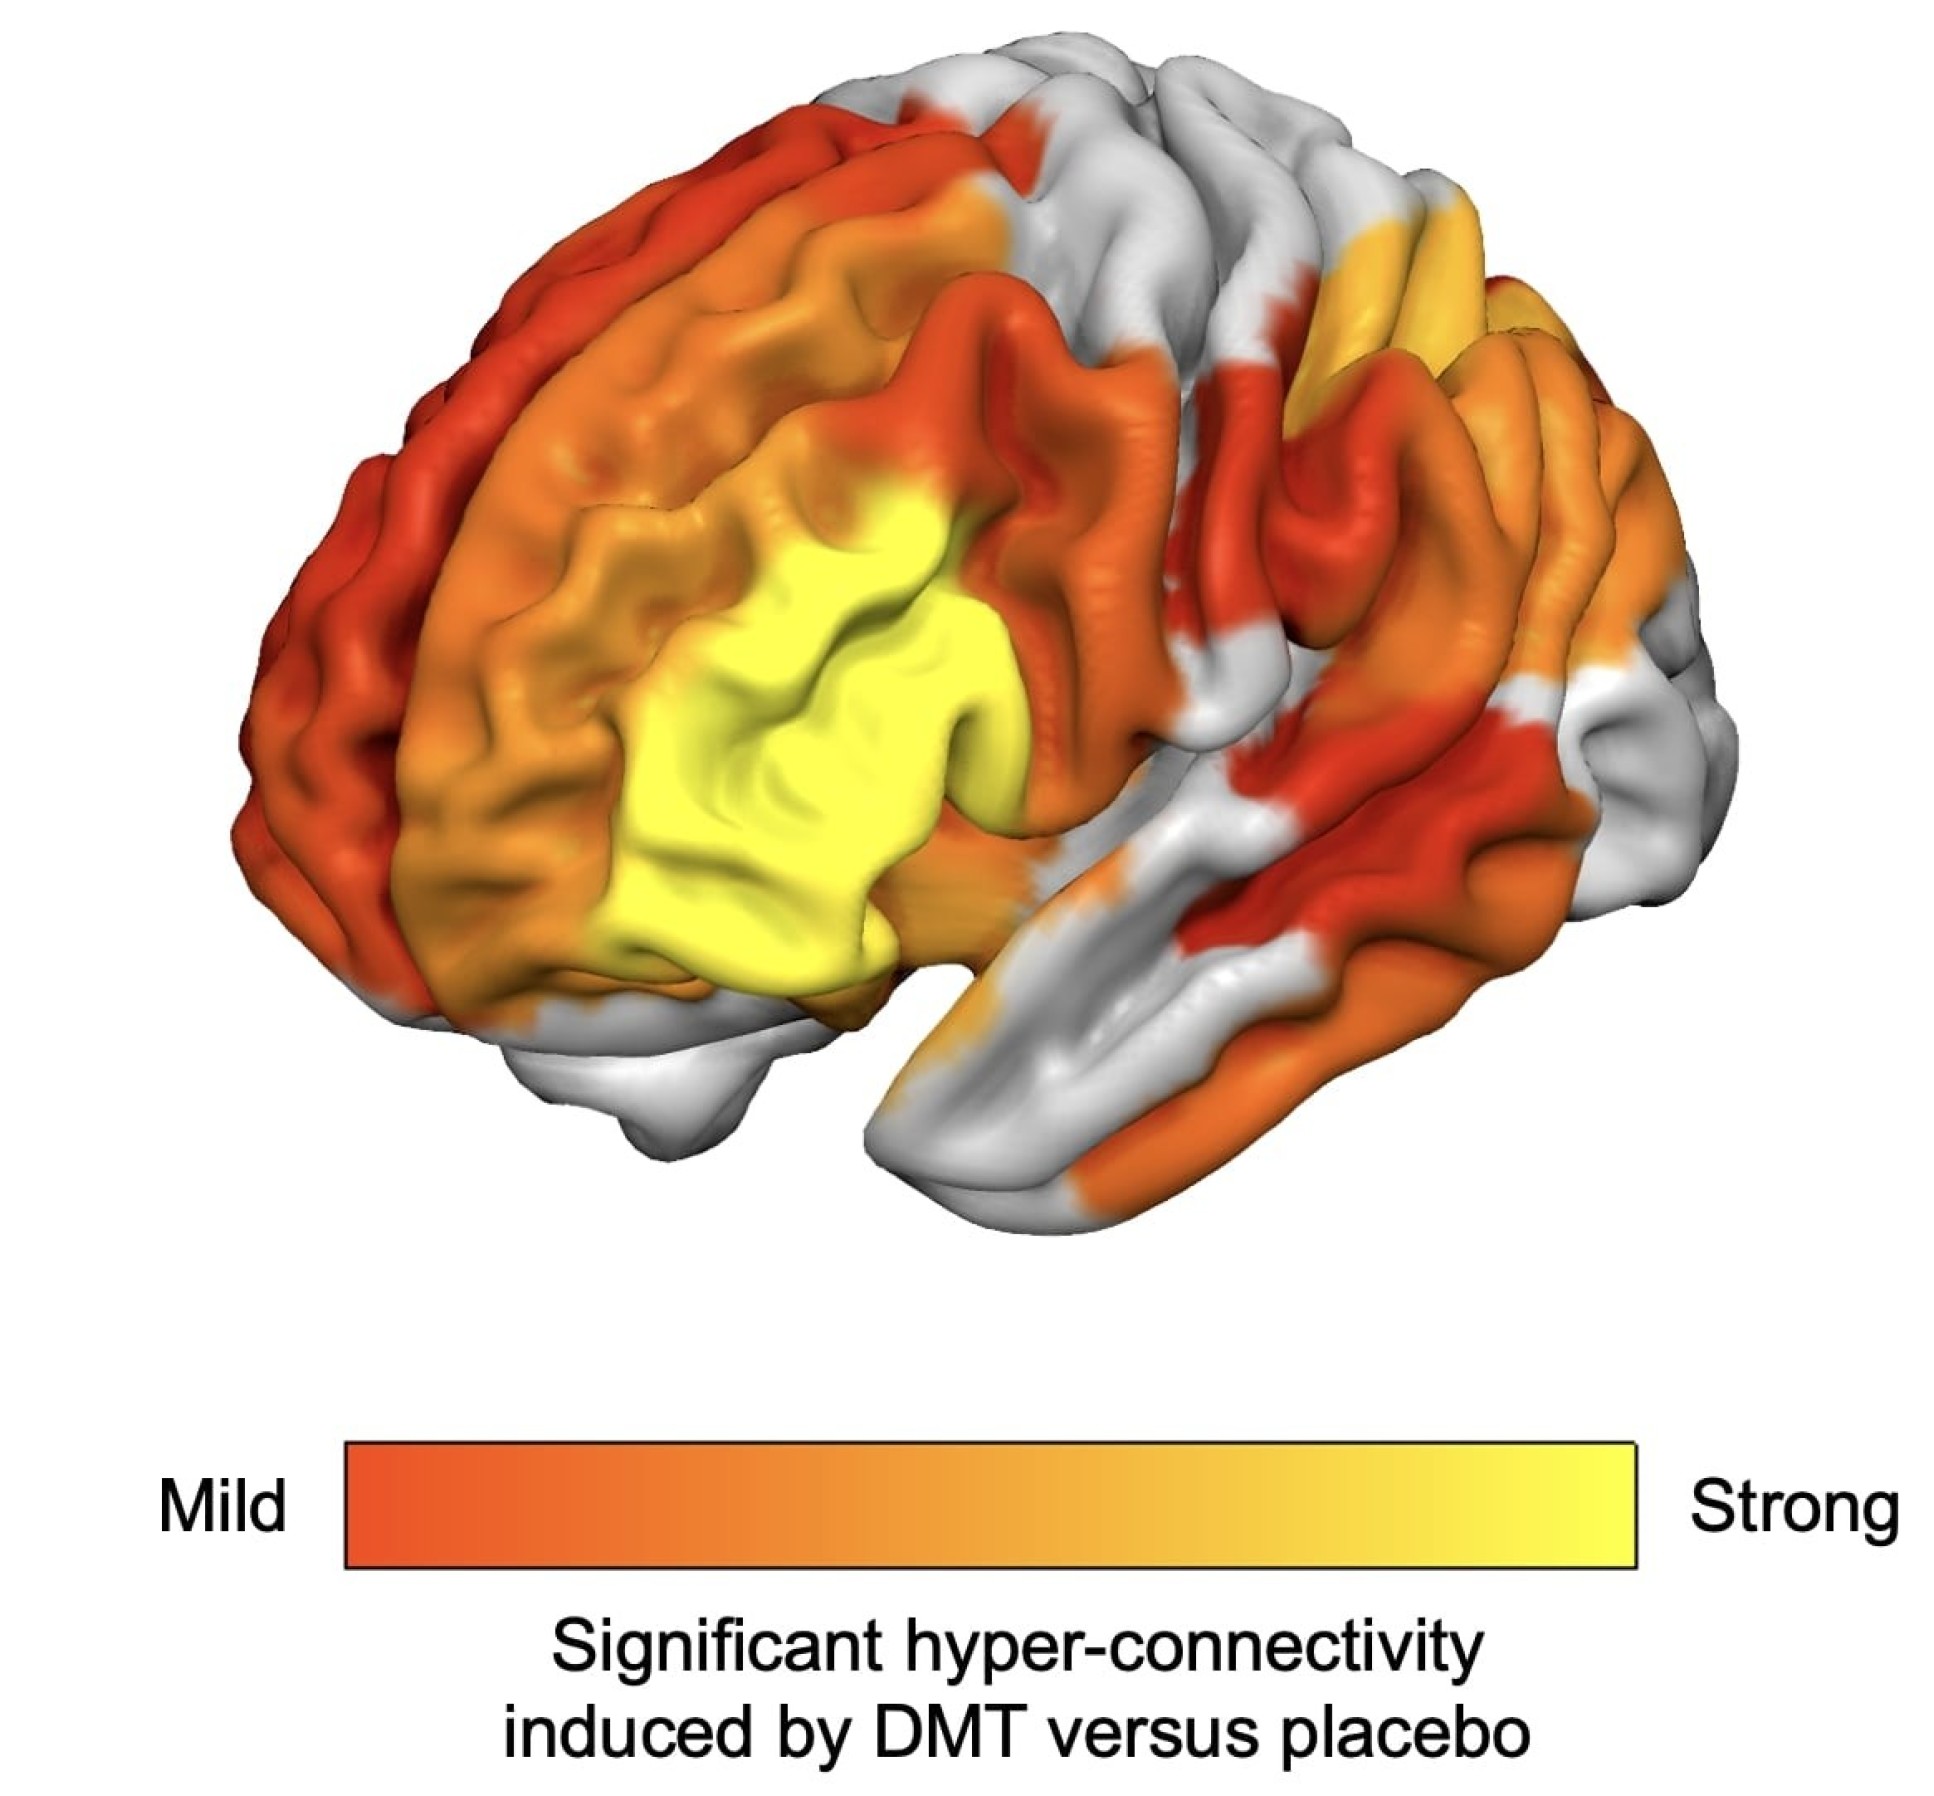 CGI model showing areas of hyper-connectivity in the brain under DMT.